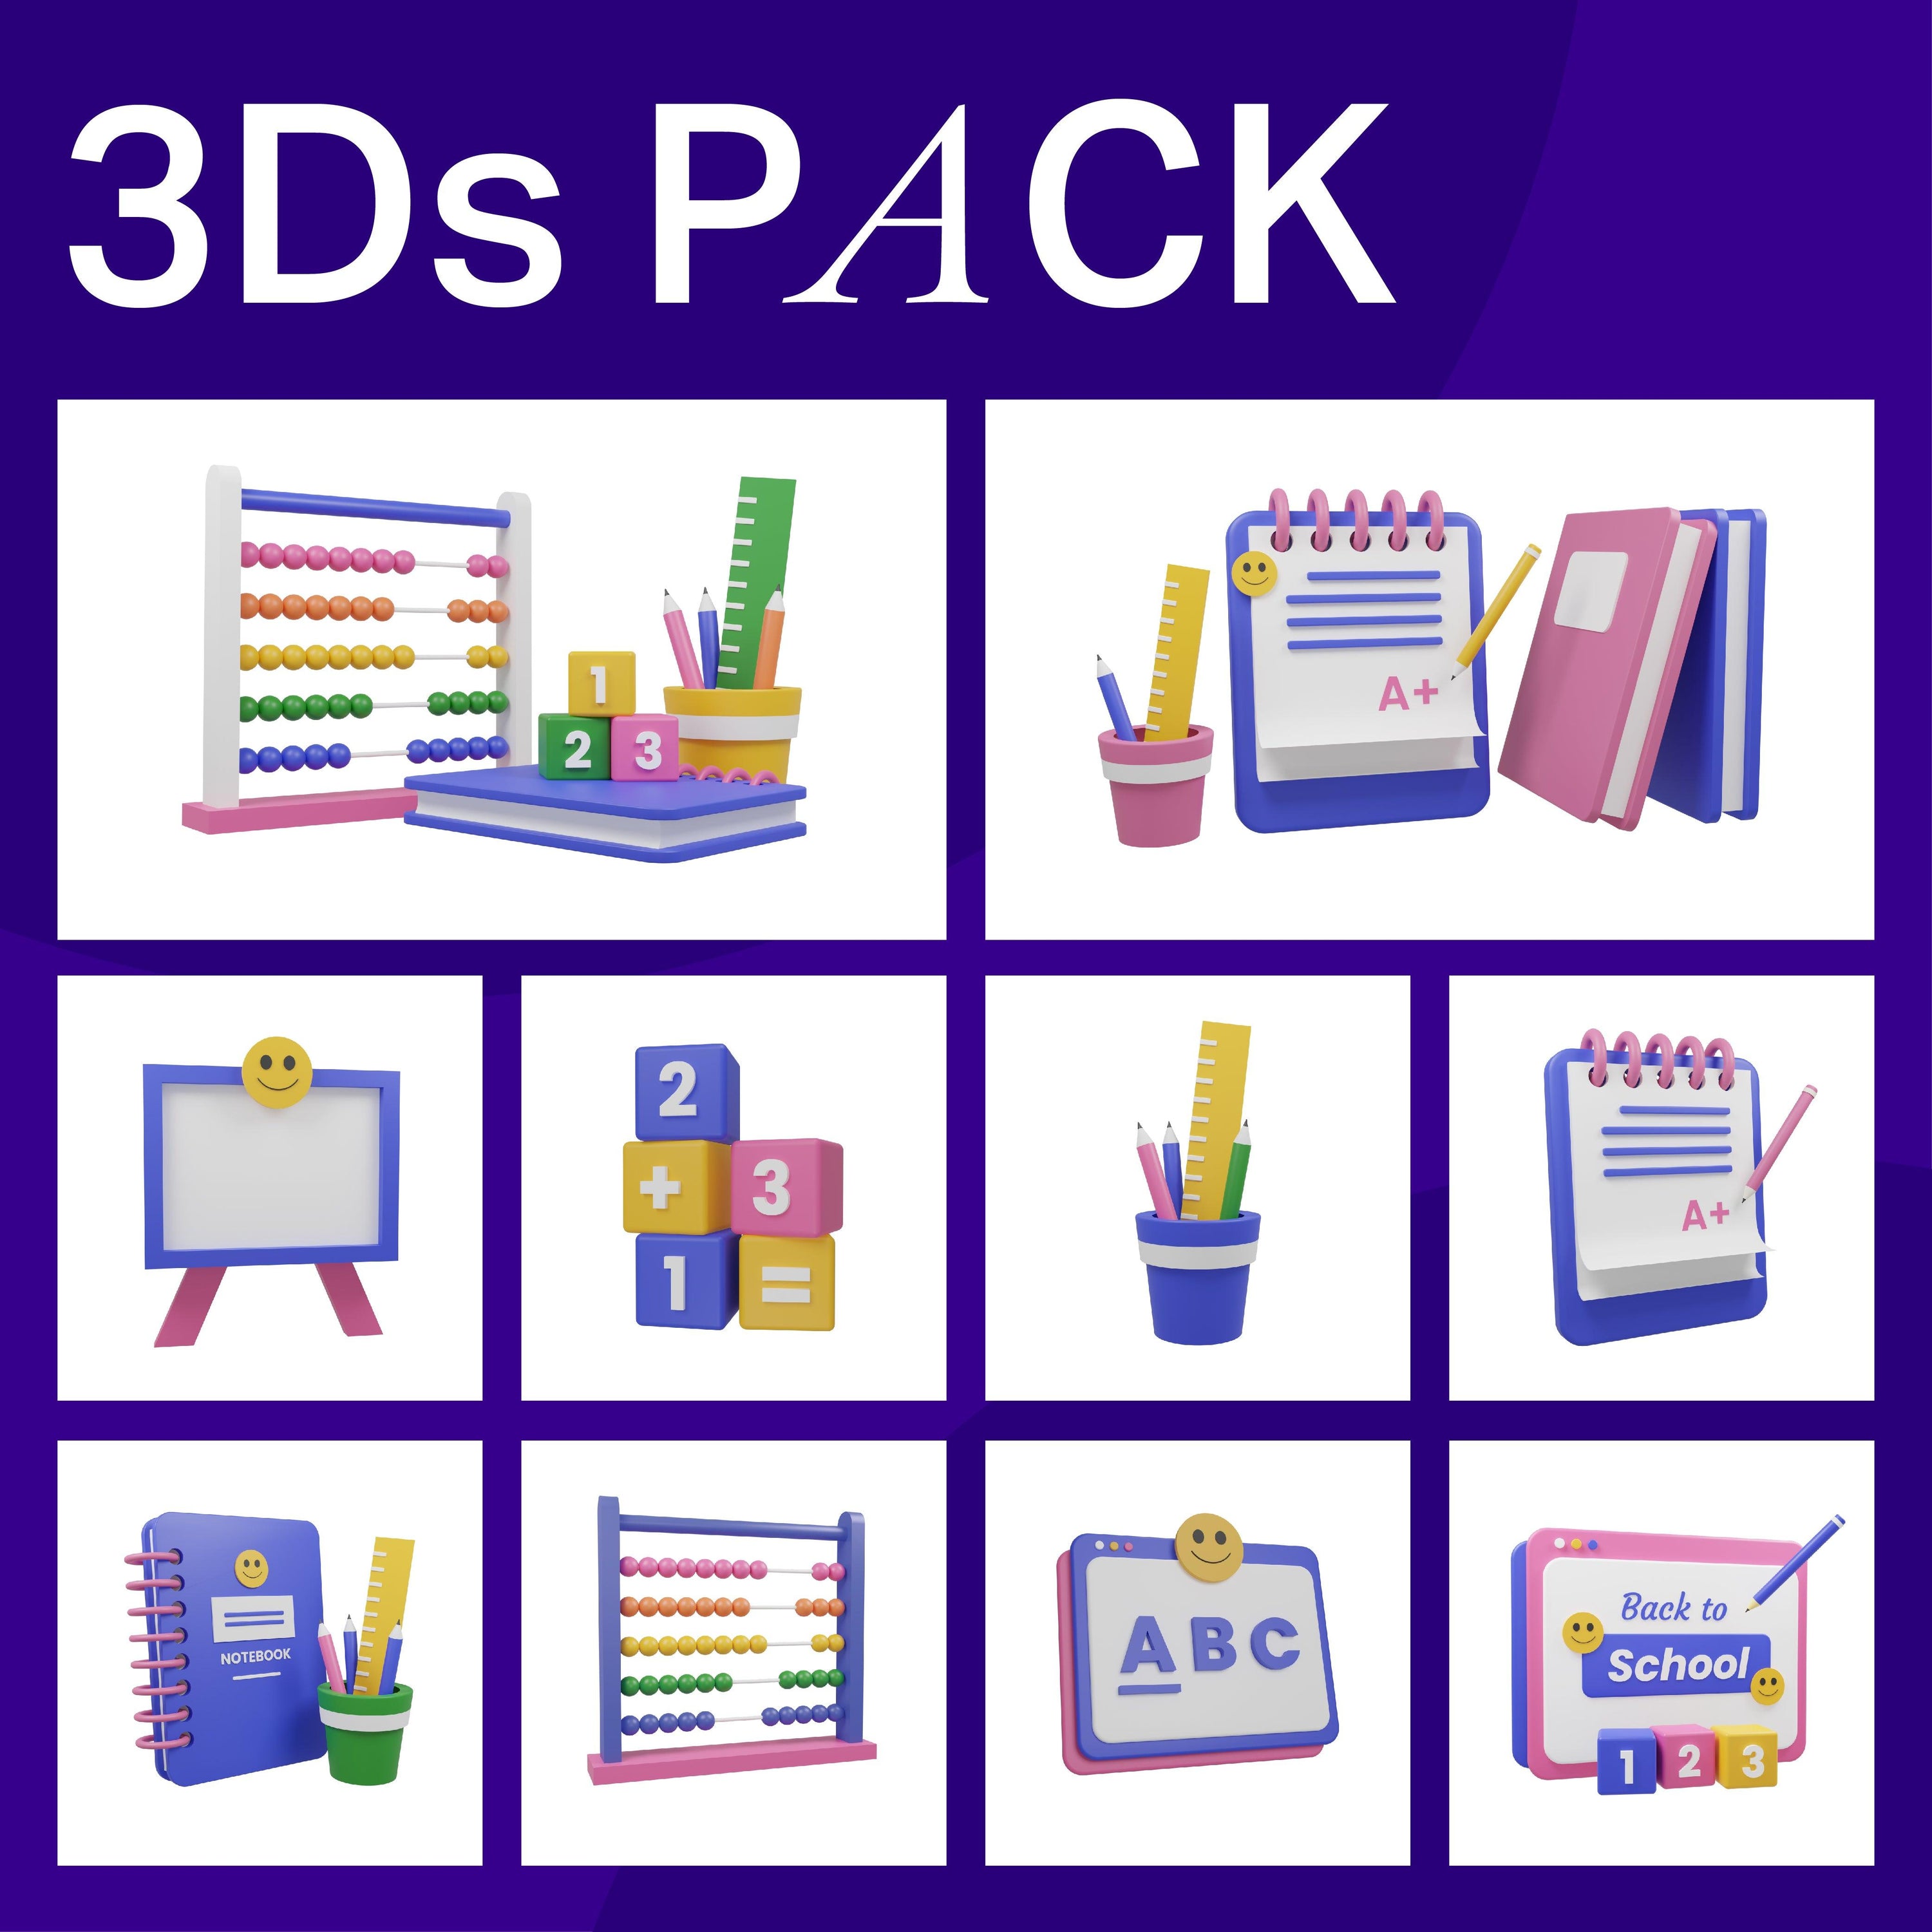 10 Education 3D Icons Pack